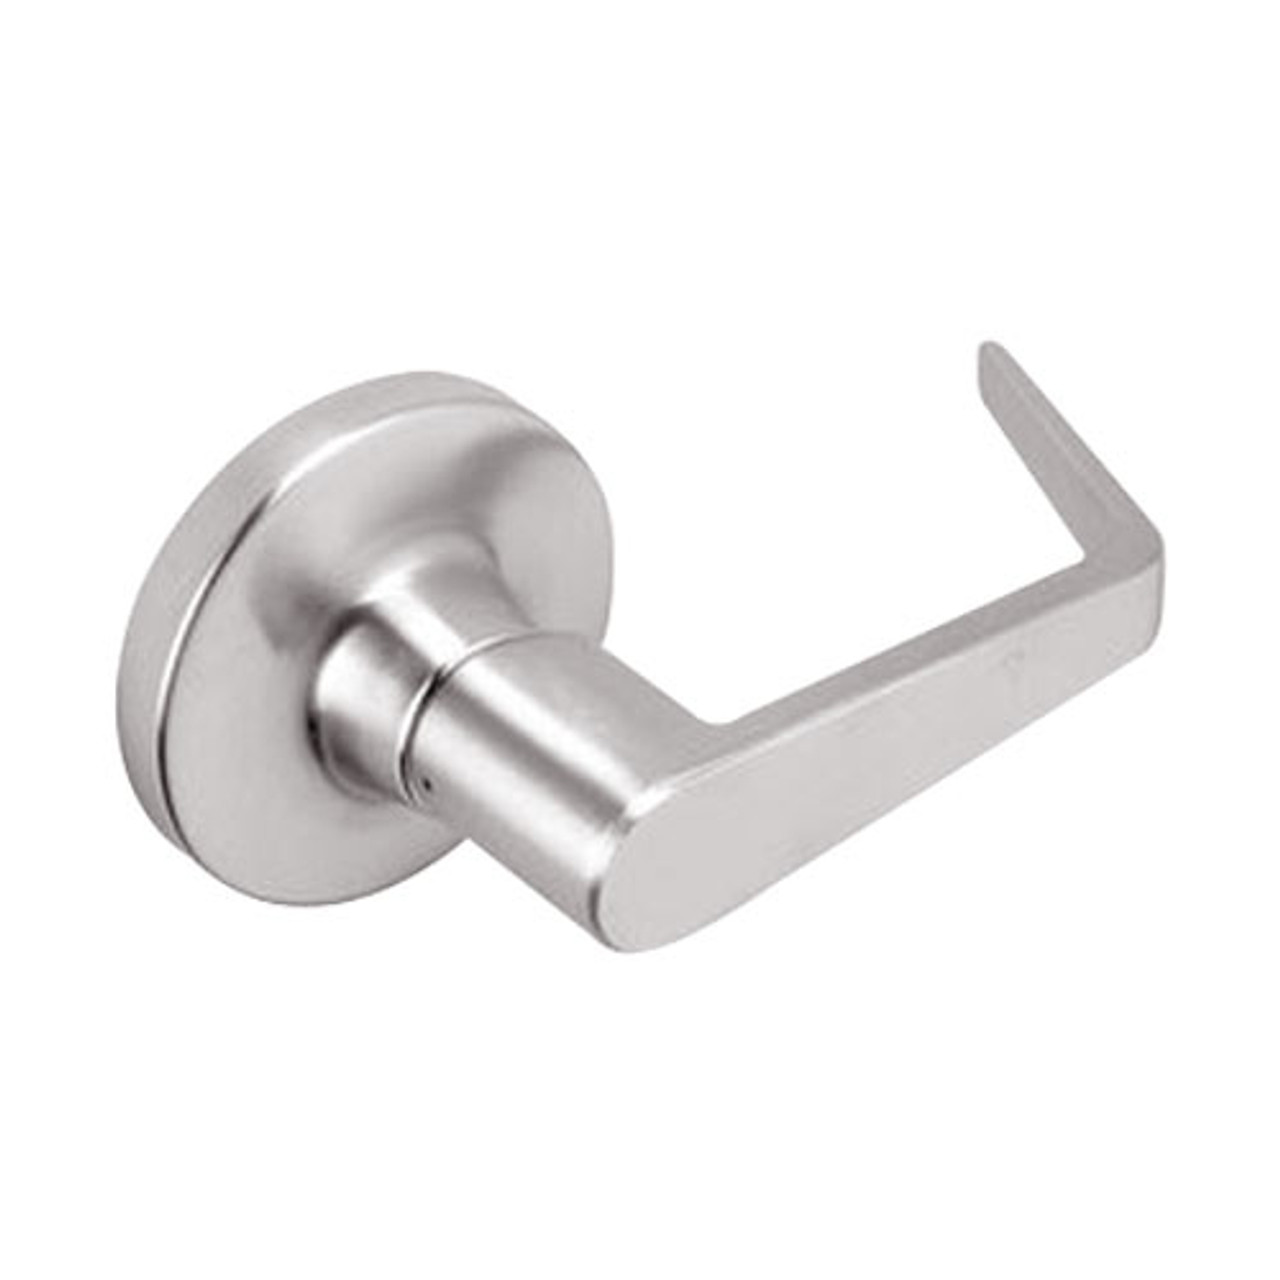 MA311-DG-630 Falcon Mortise Locks MA Series Privacy with DG Lever in Satin Stainless Finish